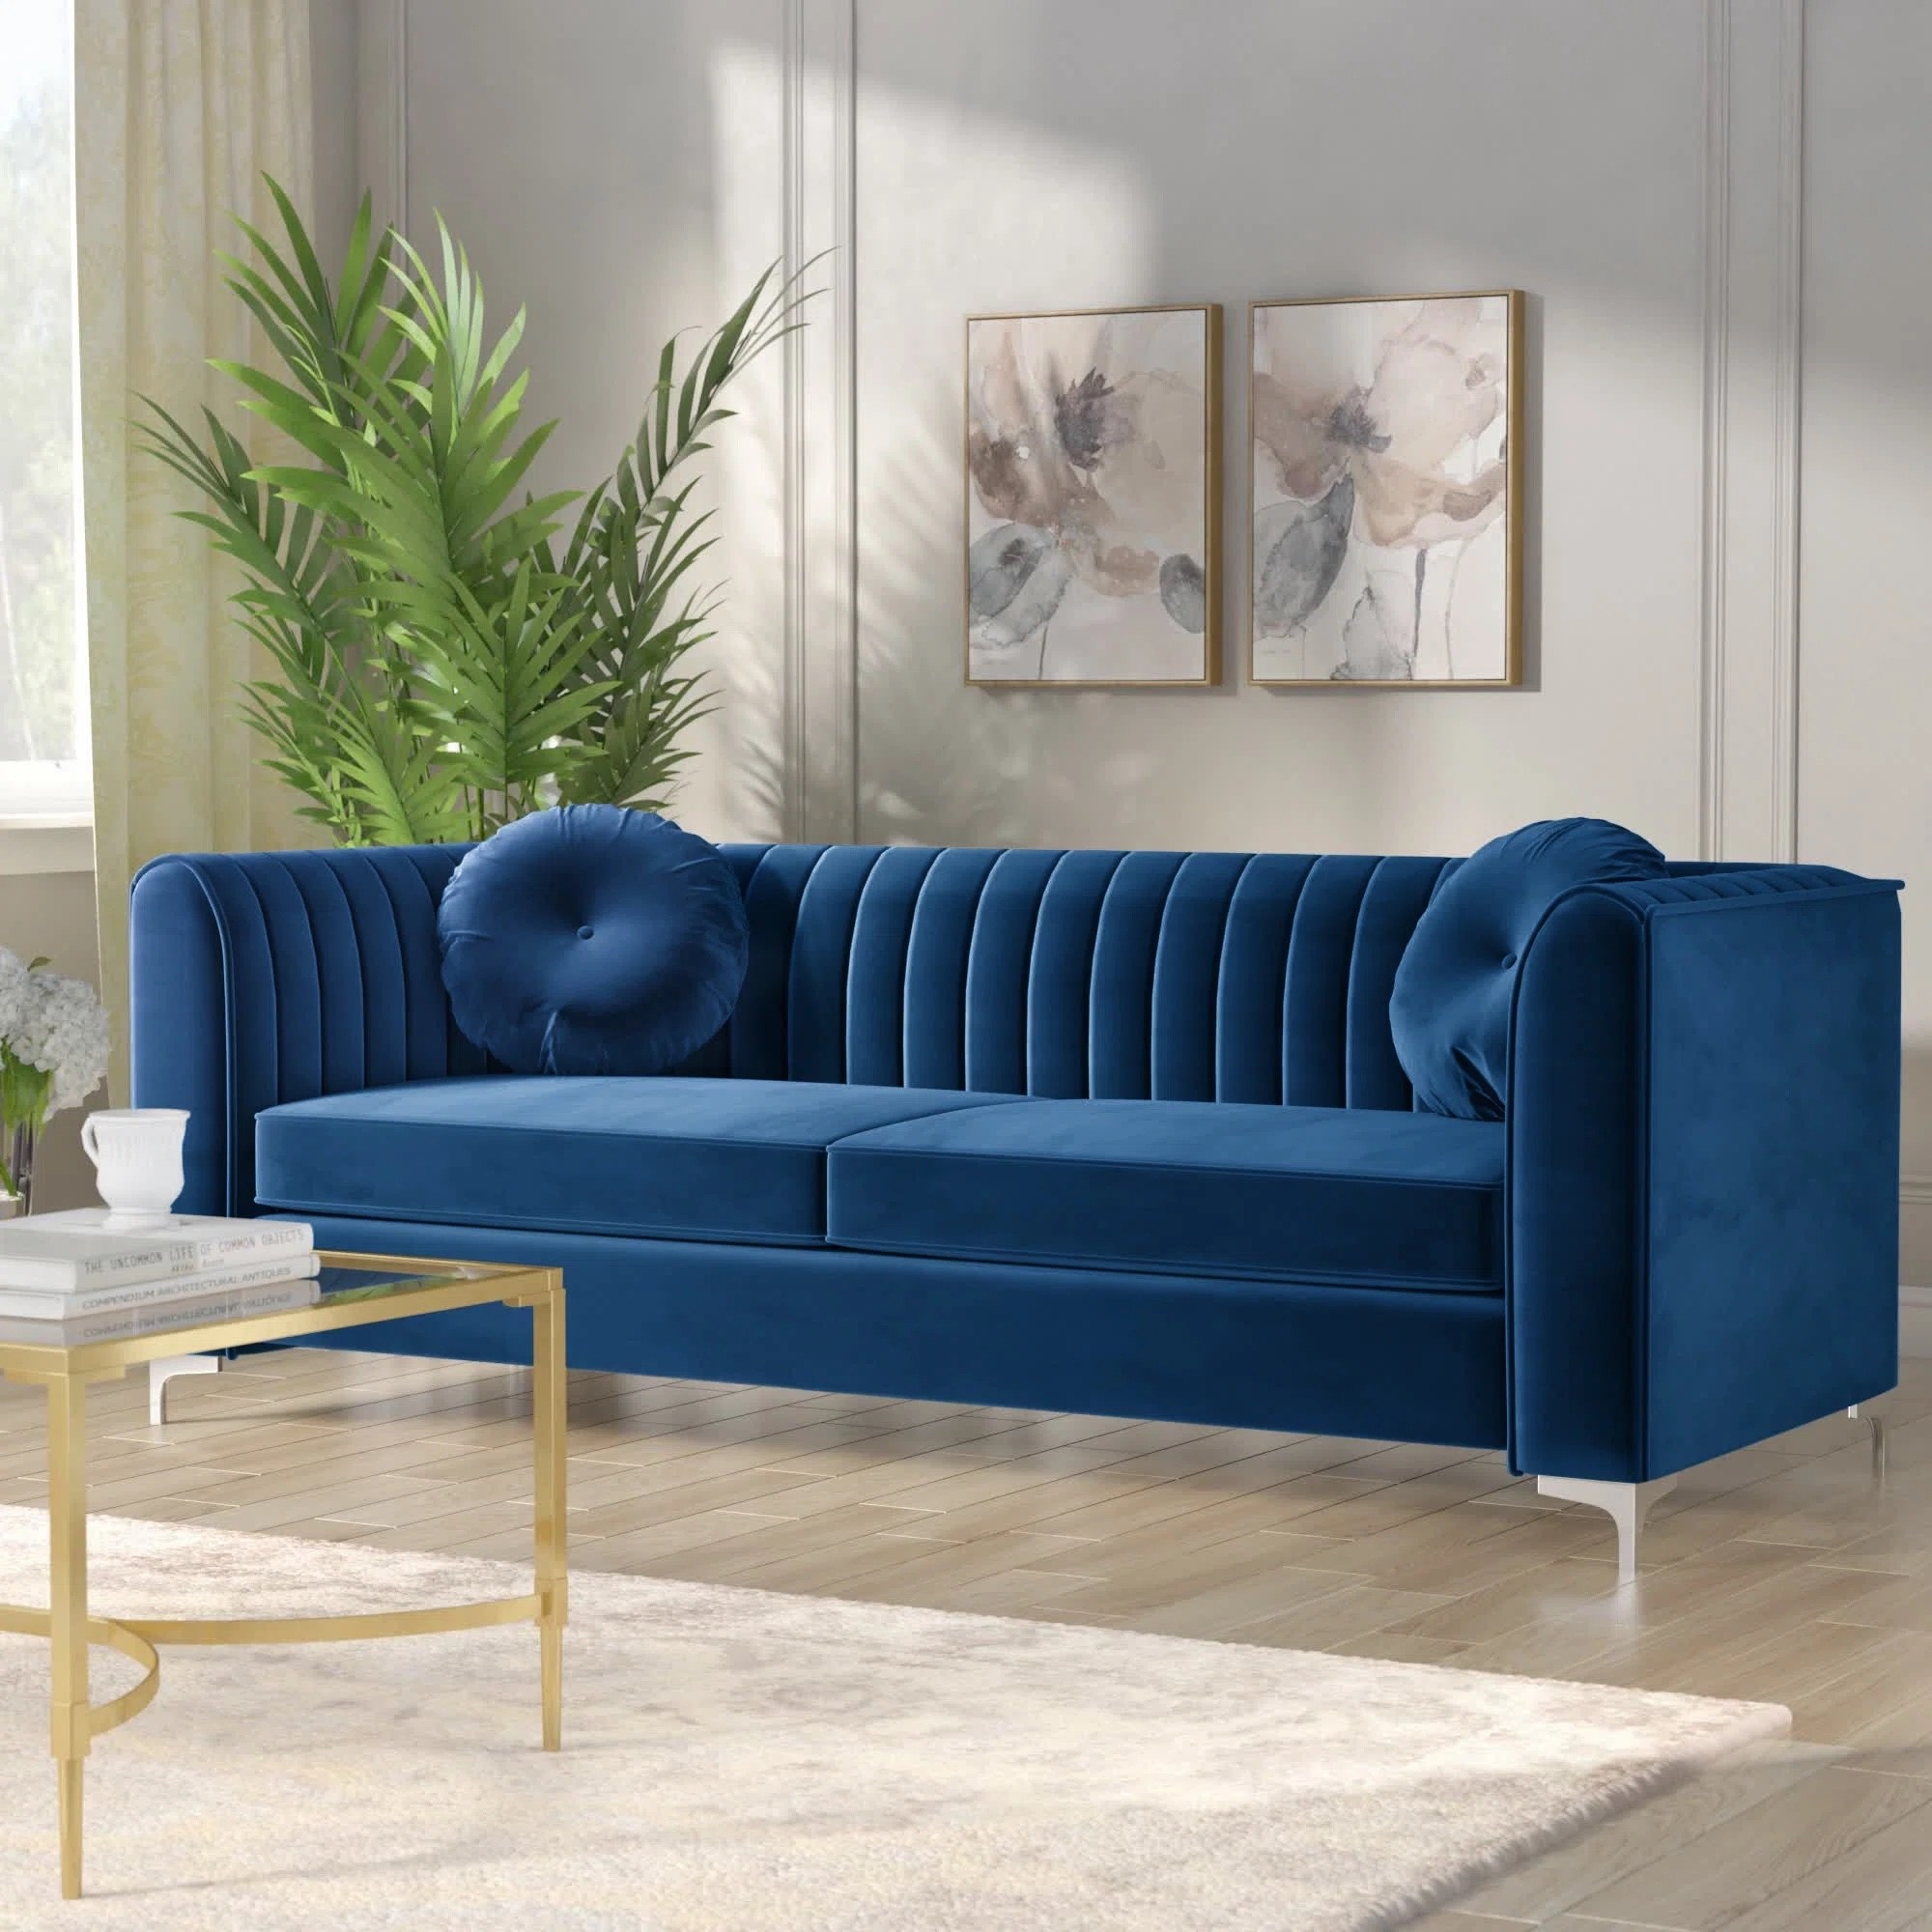 a navy colored velvet sofa with metalic legs in a living room